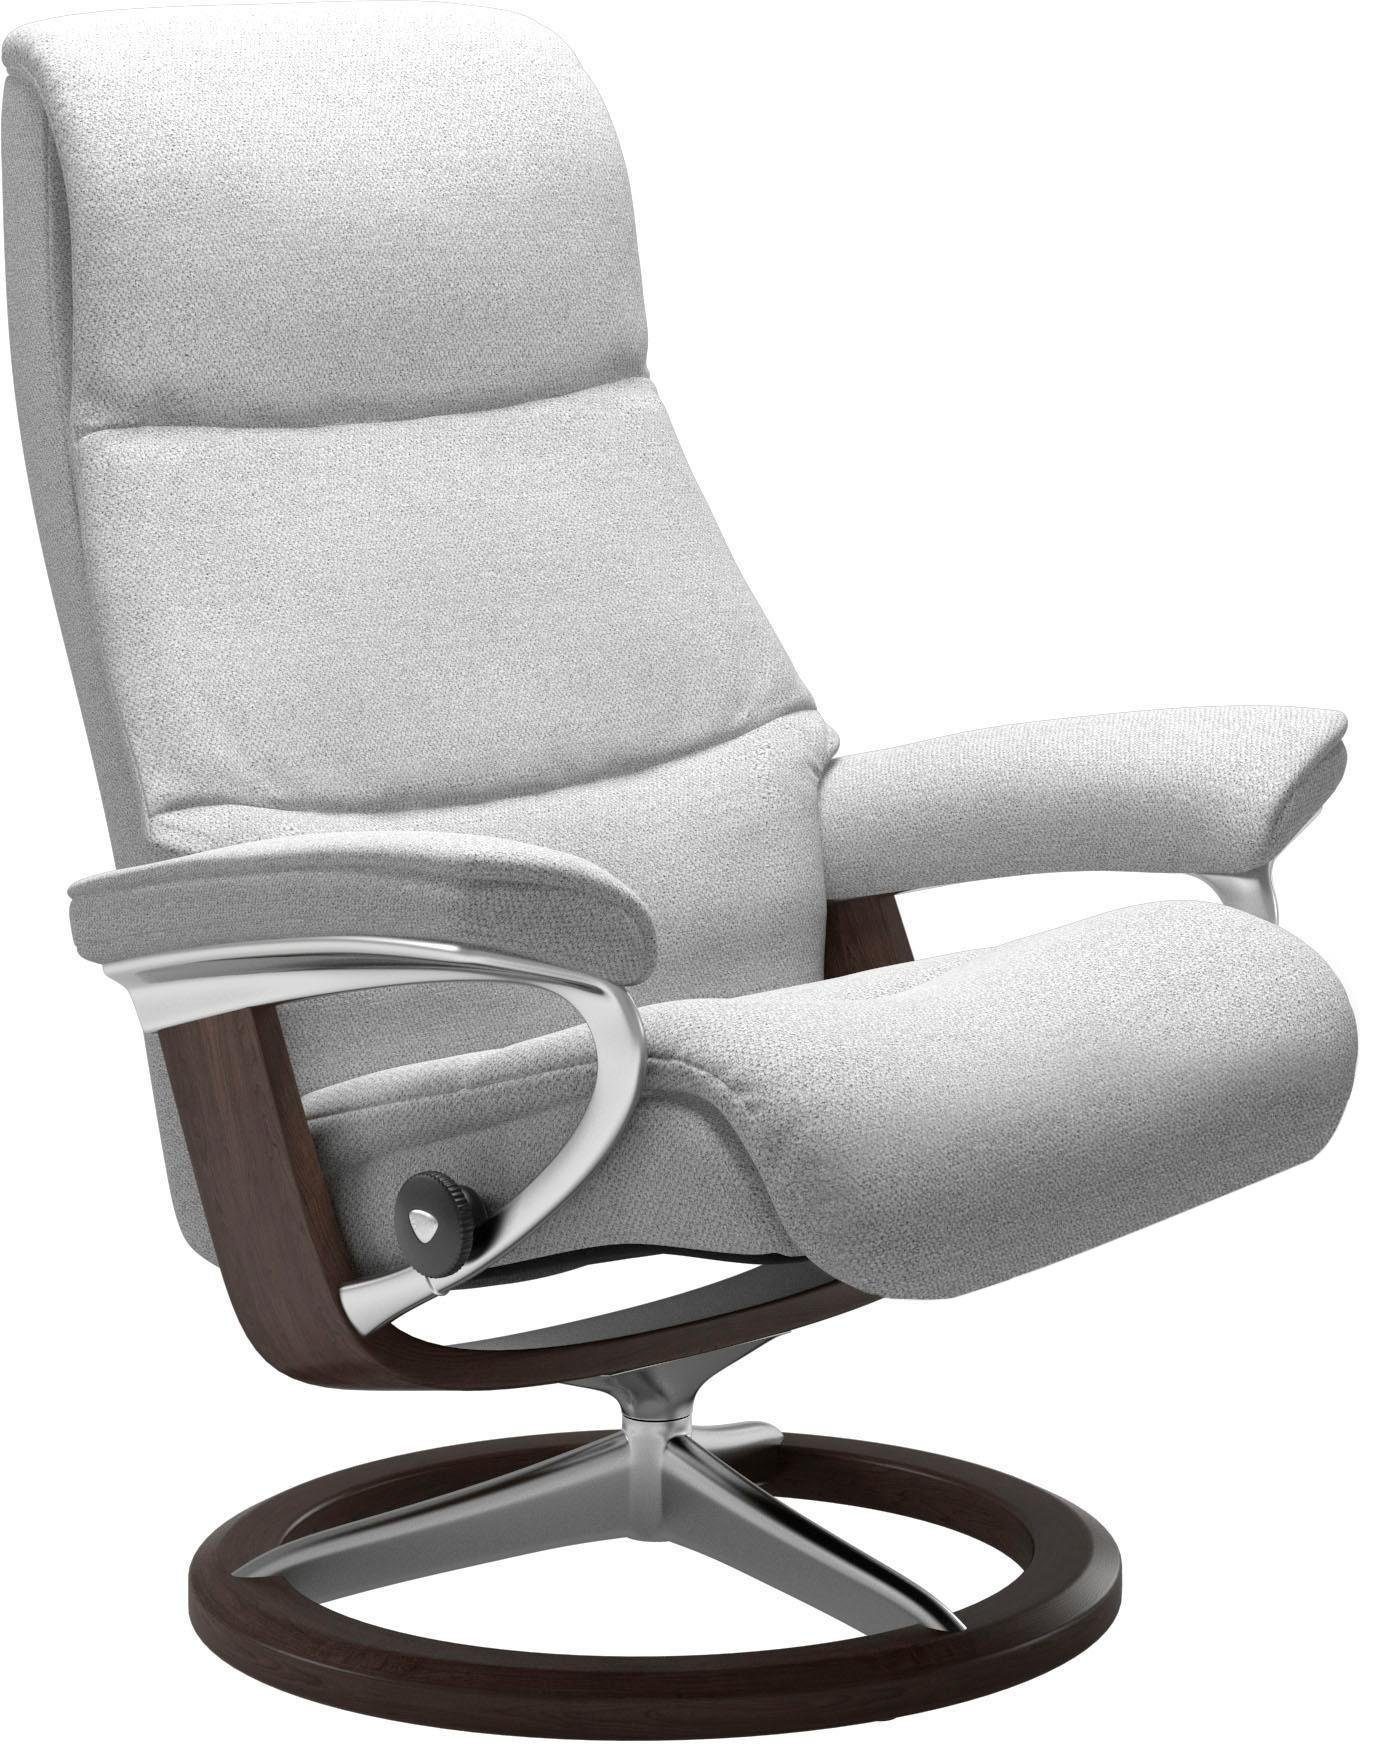 Stressless® Relaxsessel S,Gestell mit Größe Wenge View, Signature Base